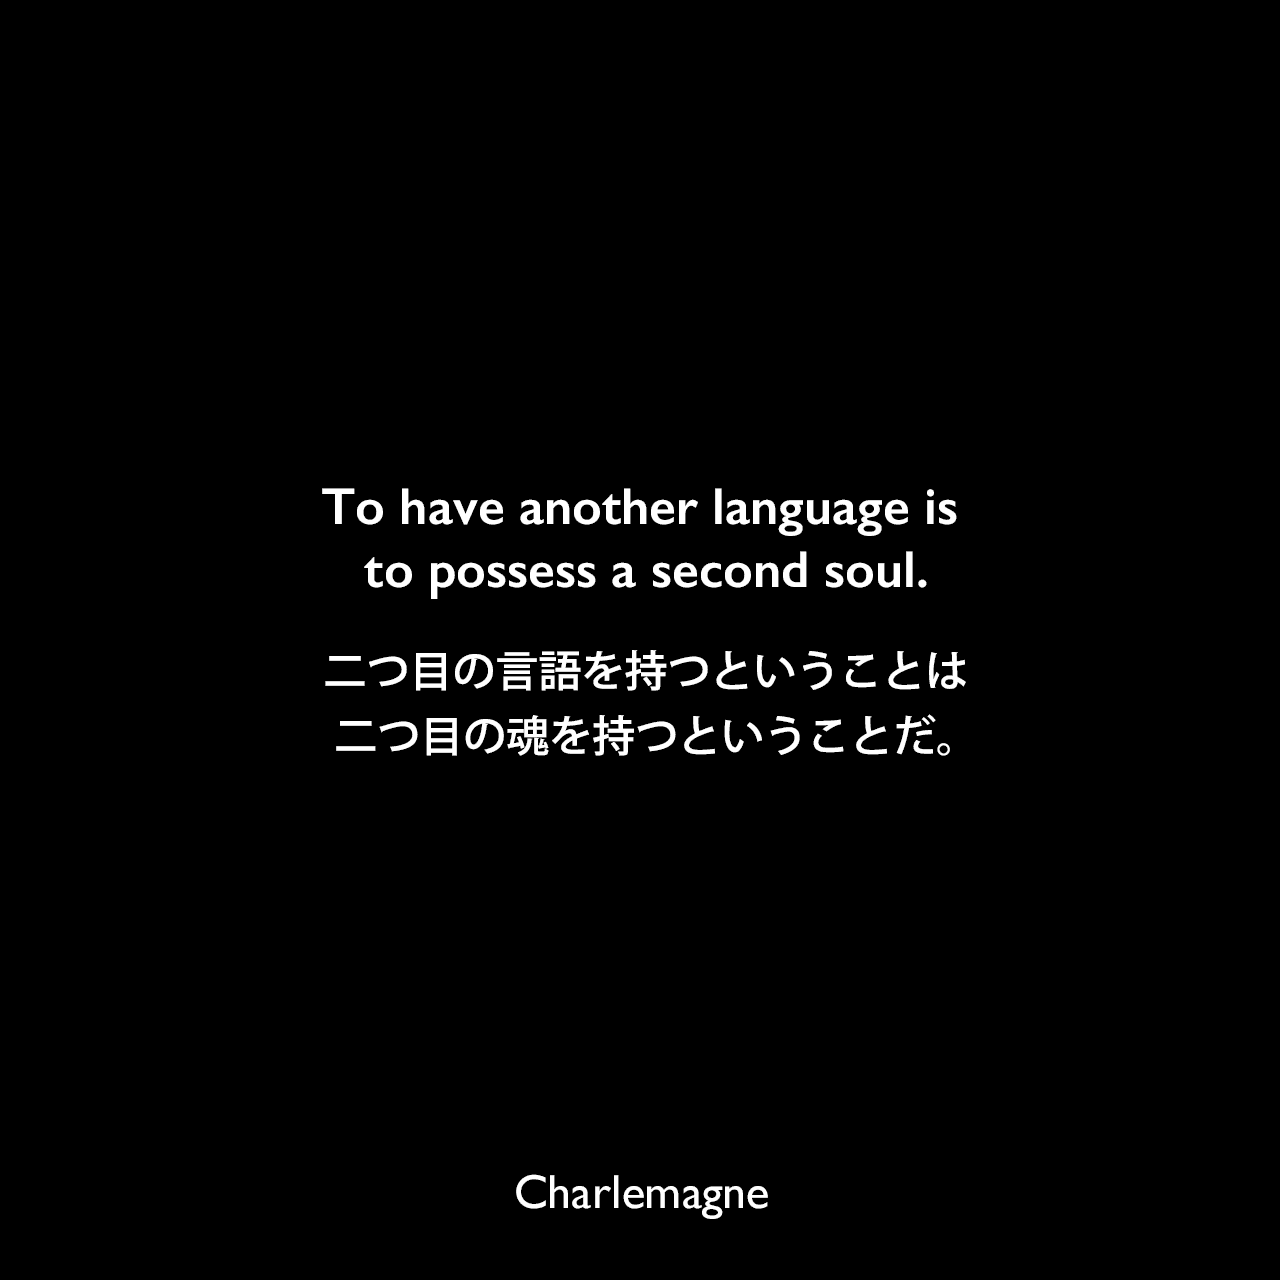 To have another language is to possess a second soul.二つ目の言語を持つということは、二つ目の魂を持つということだ。Charlemagne